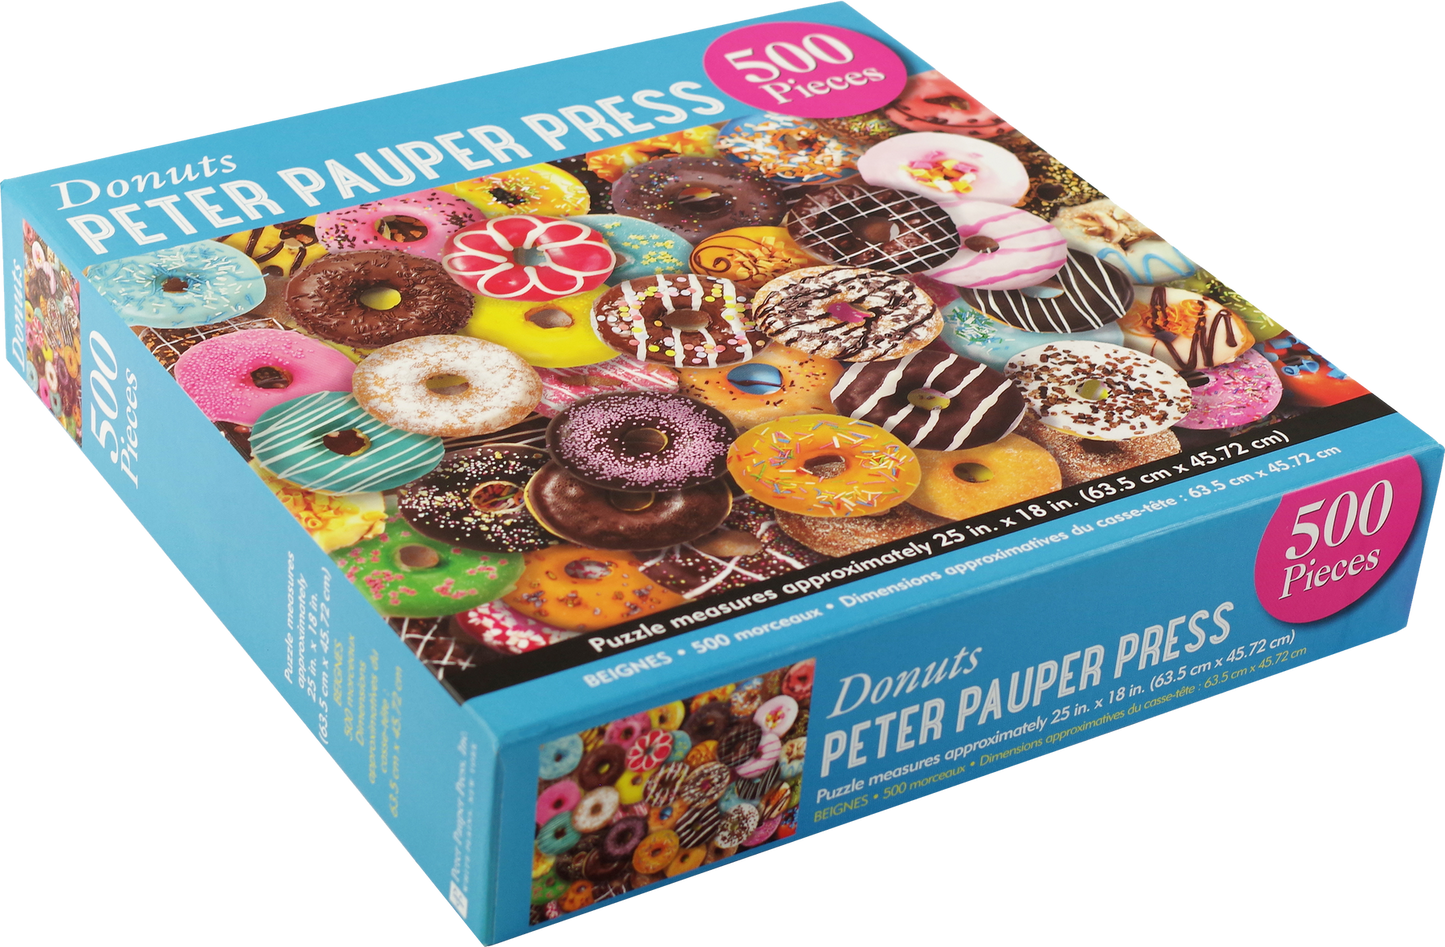 PPP Puzzle Donuts 500Pc